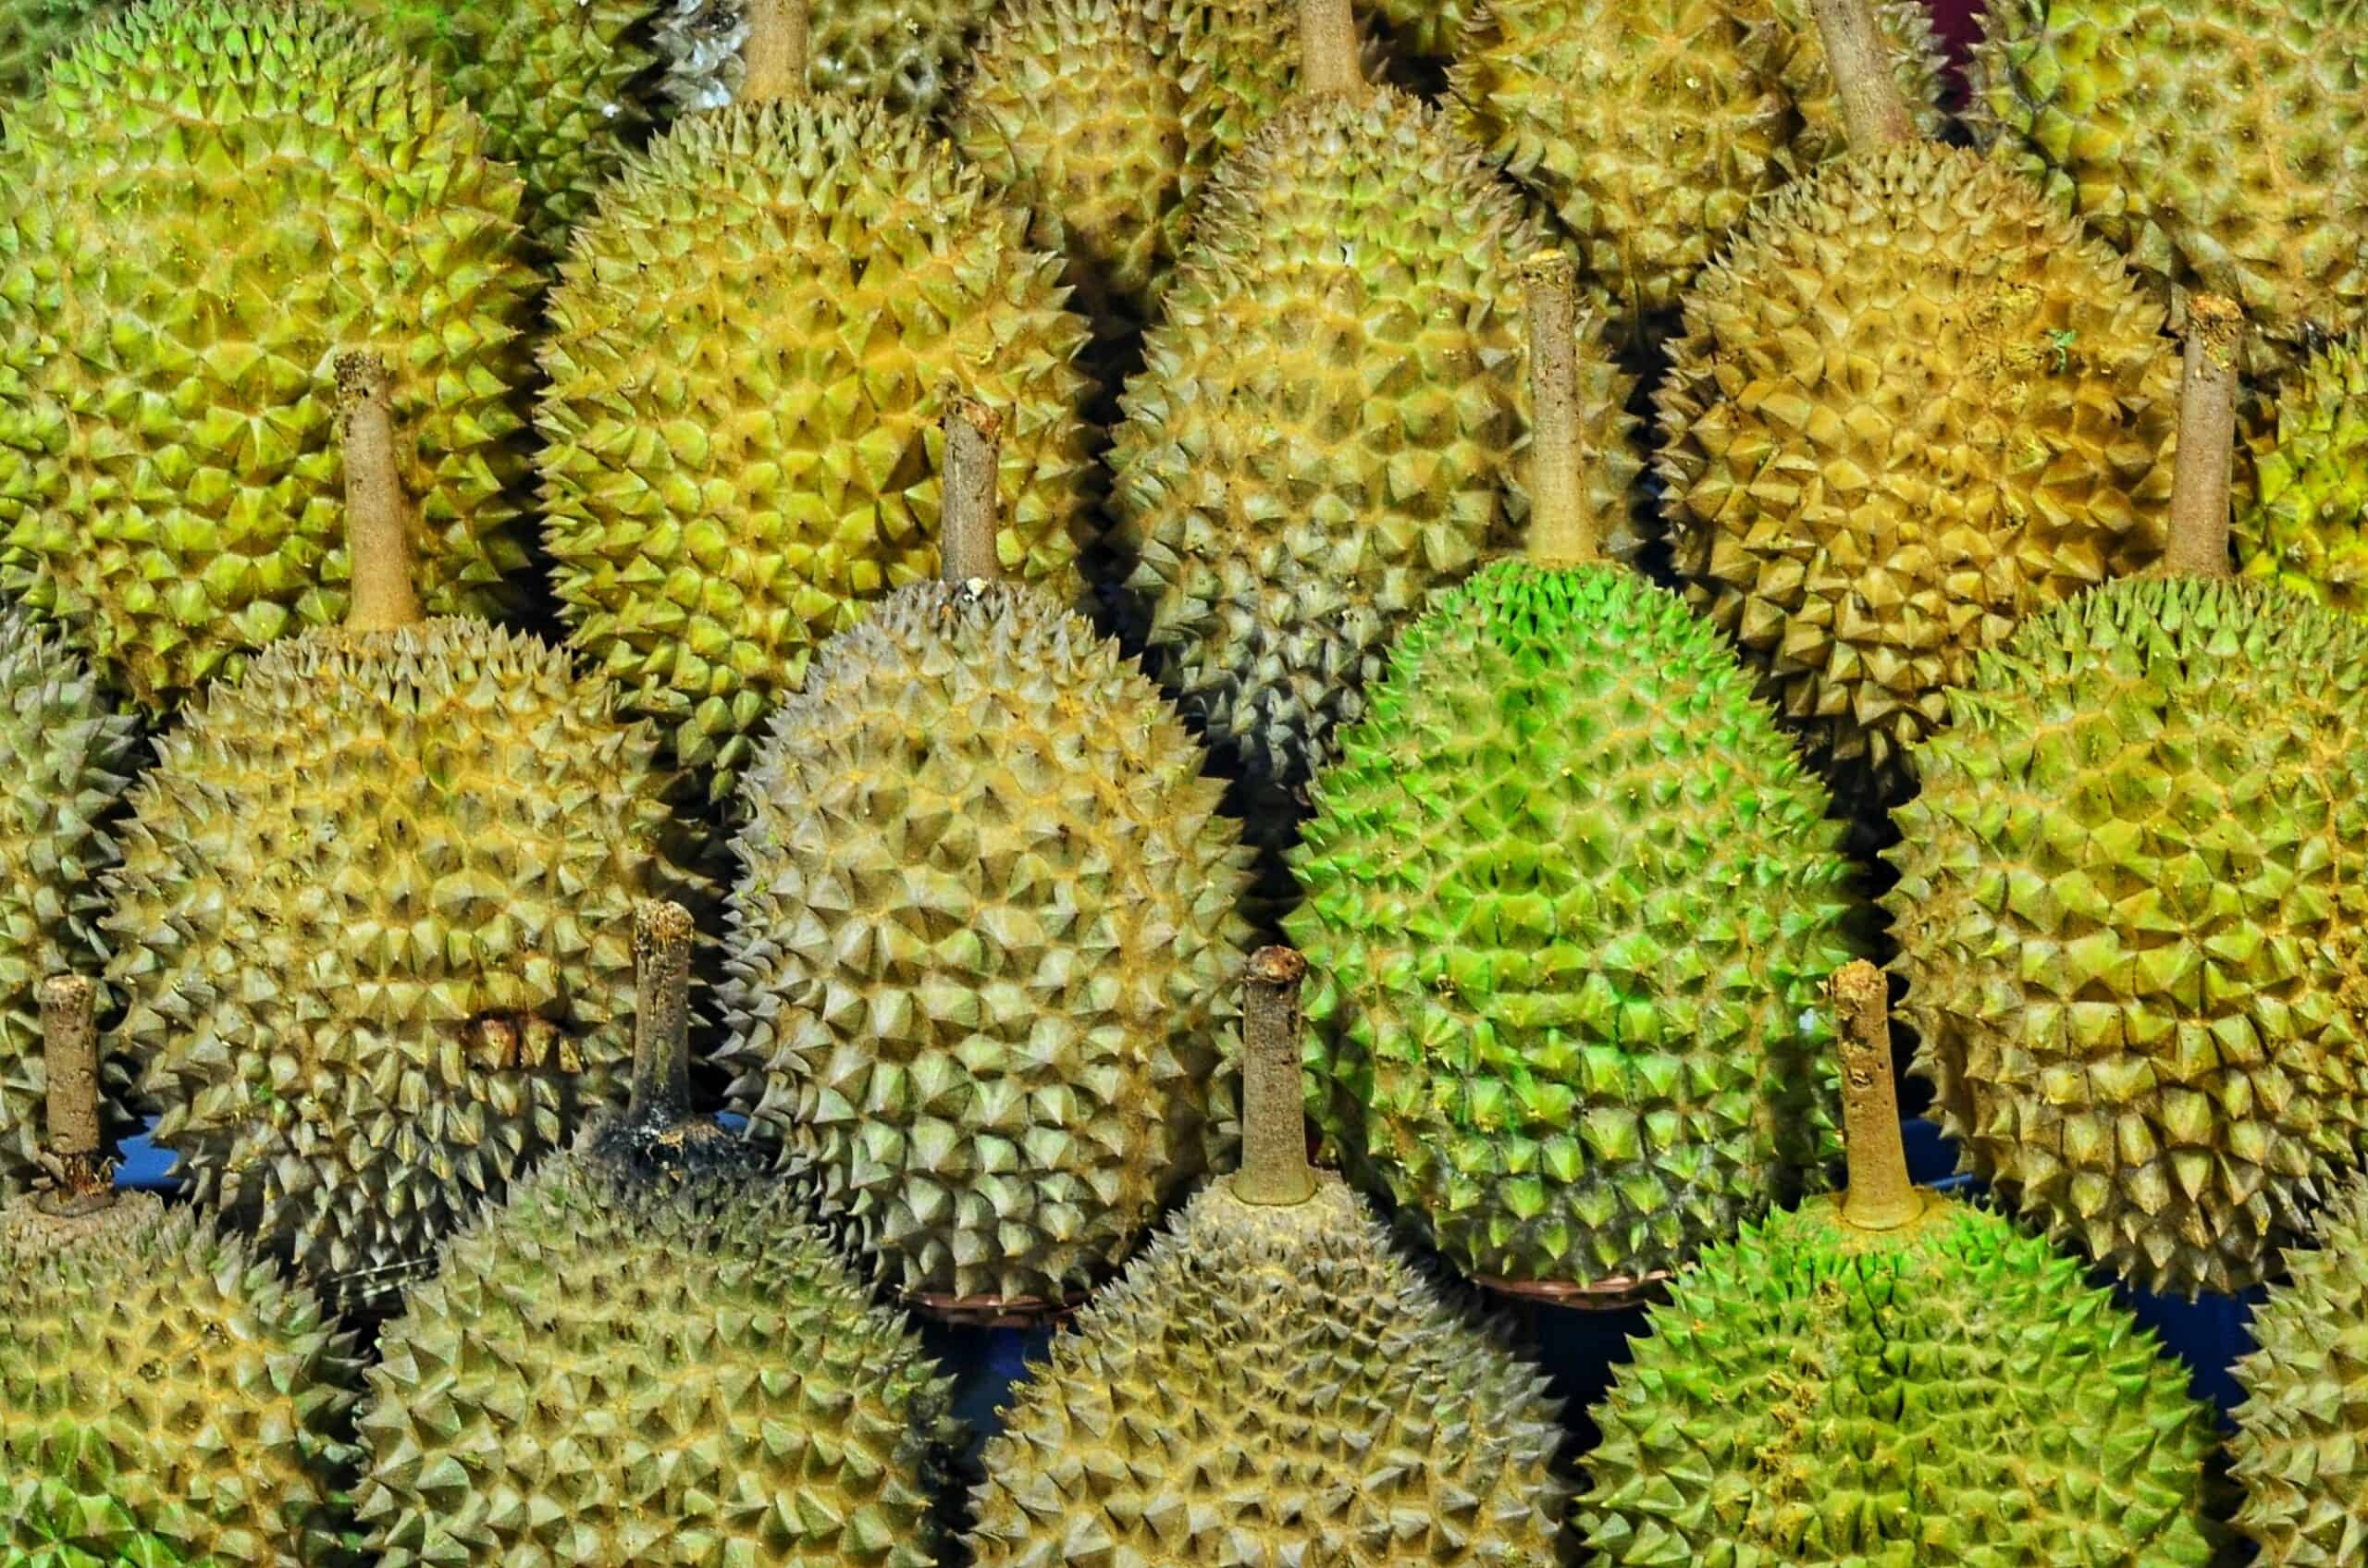 What Is Durian? Here Are Its Benefits